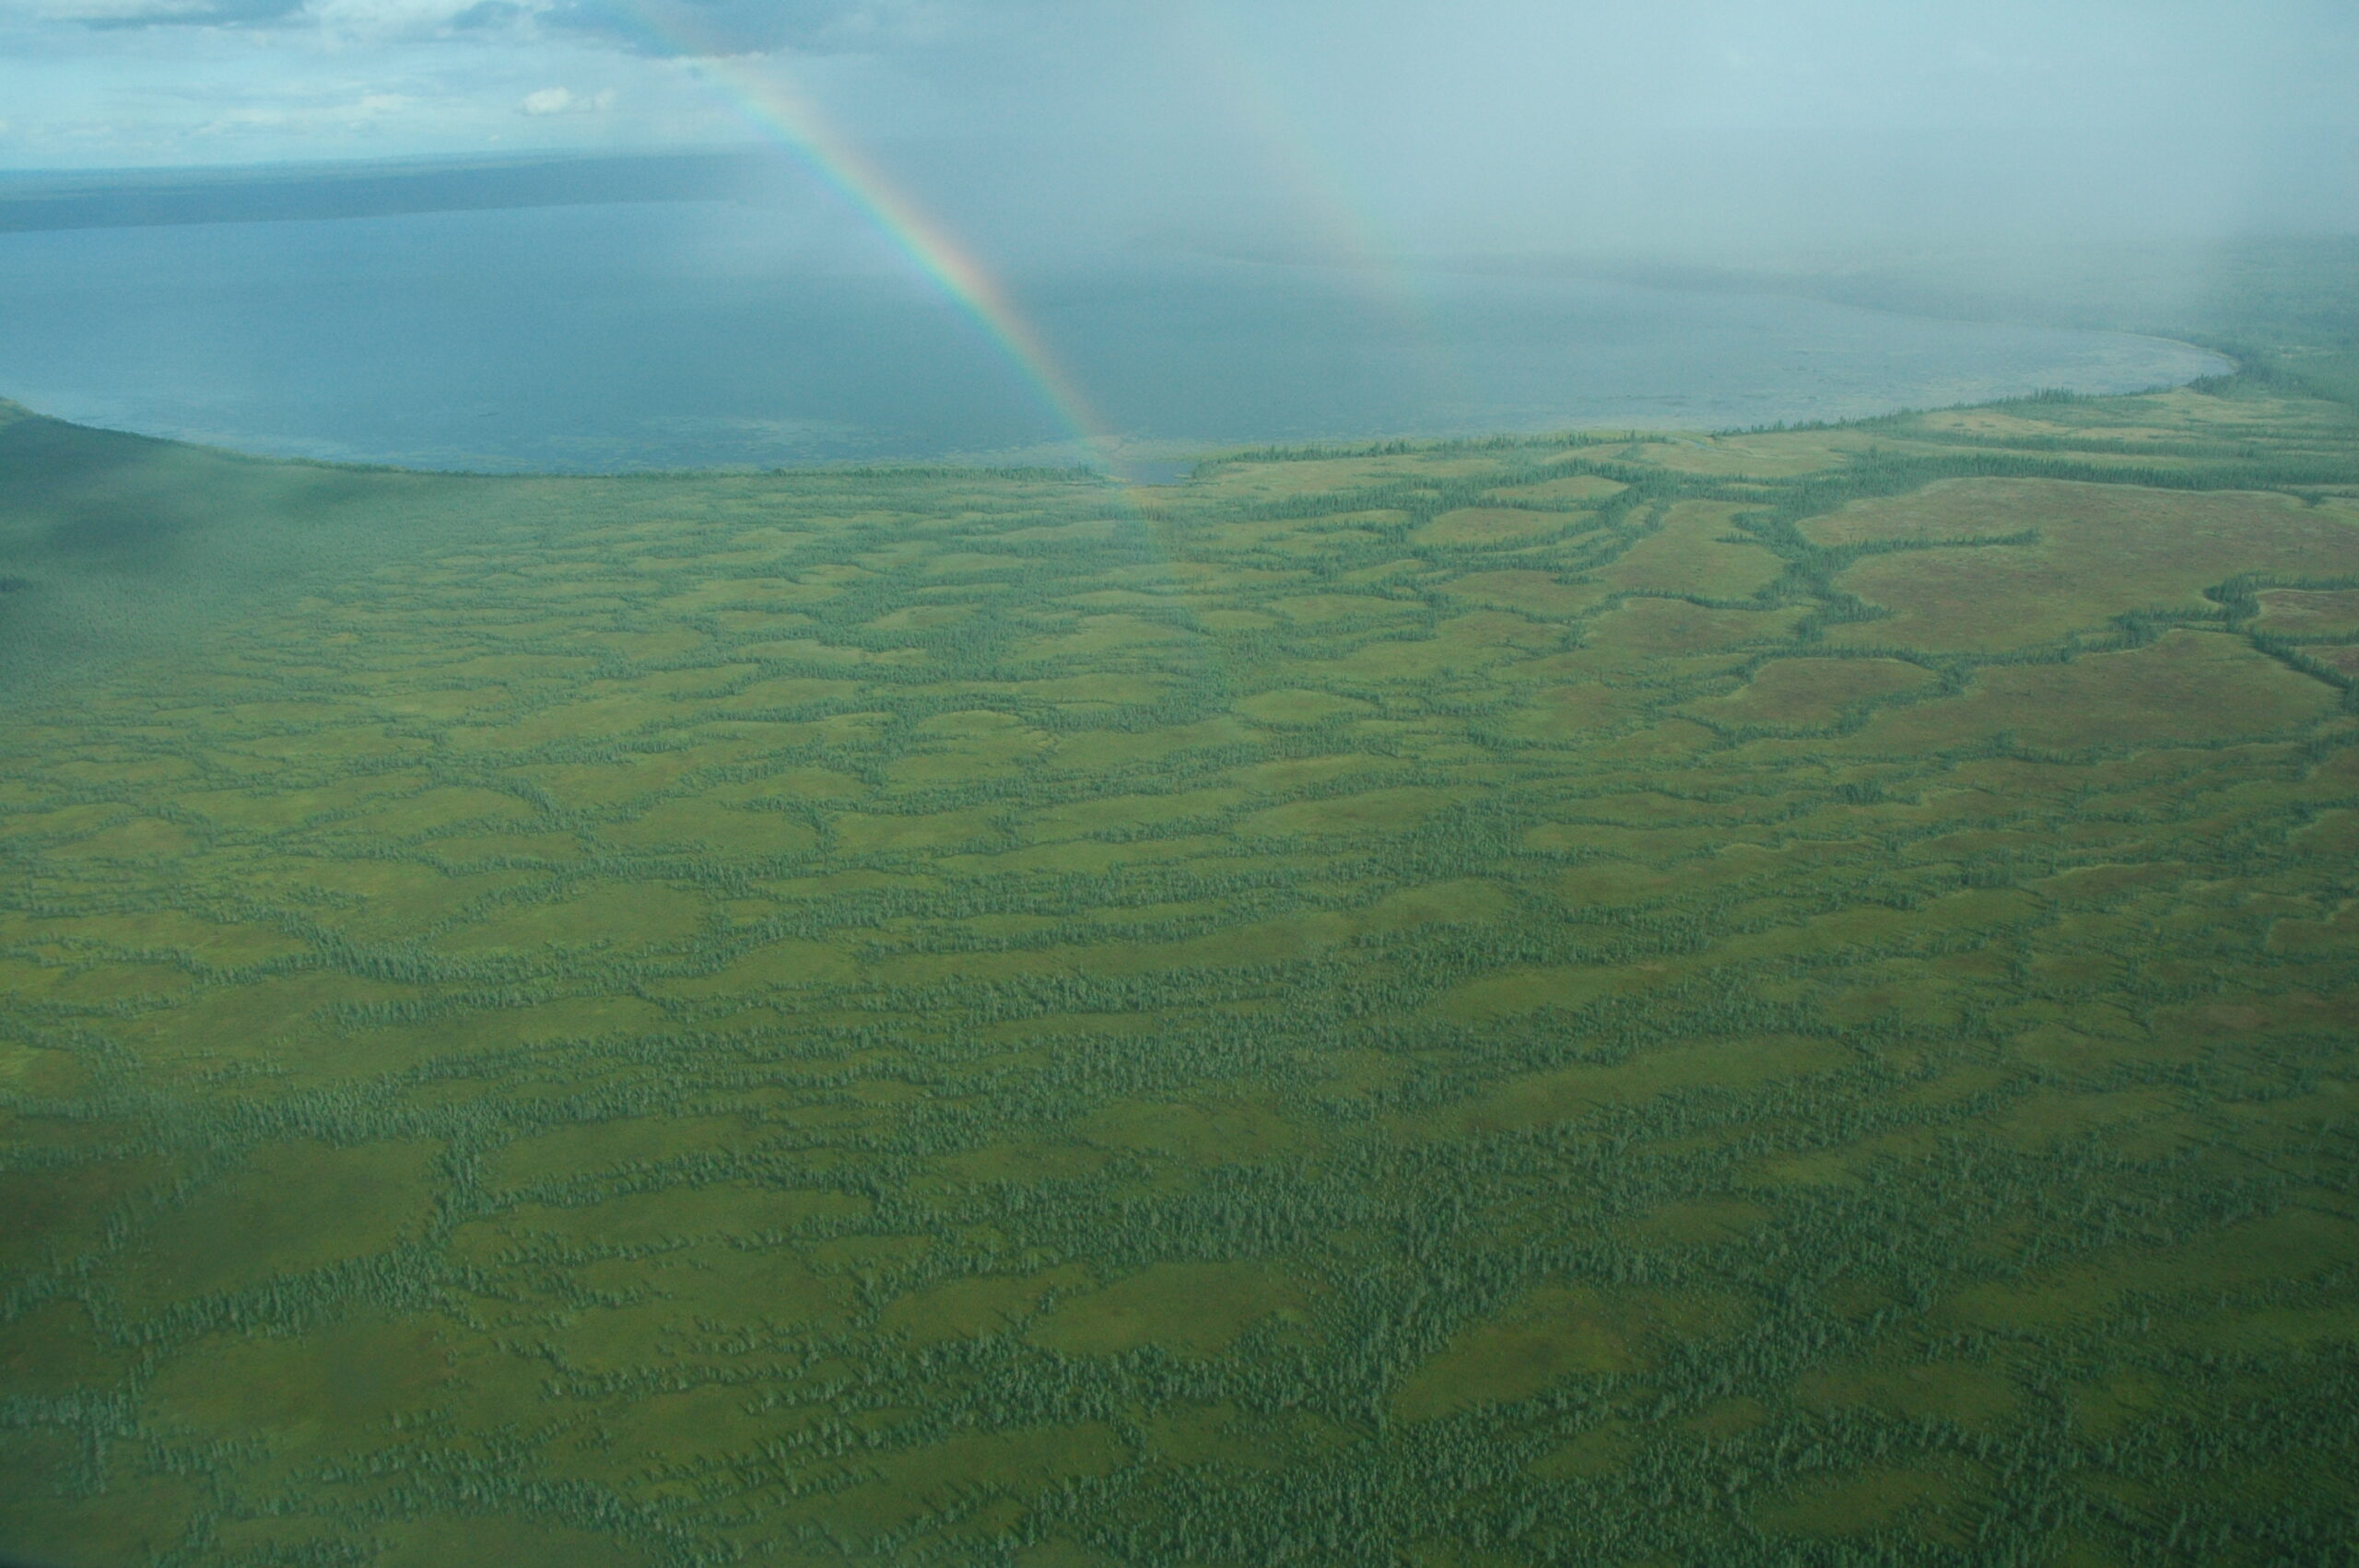 Suncor Fort Hills: a view from above of a wetland complex surrounding McClelland Lake, with a rainbow visible